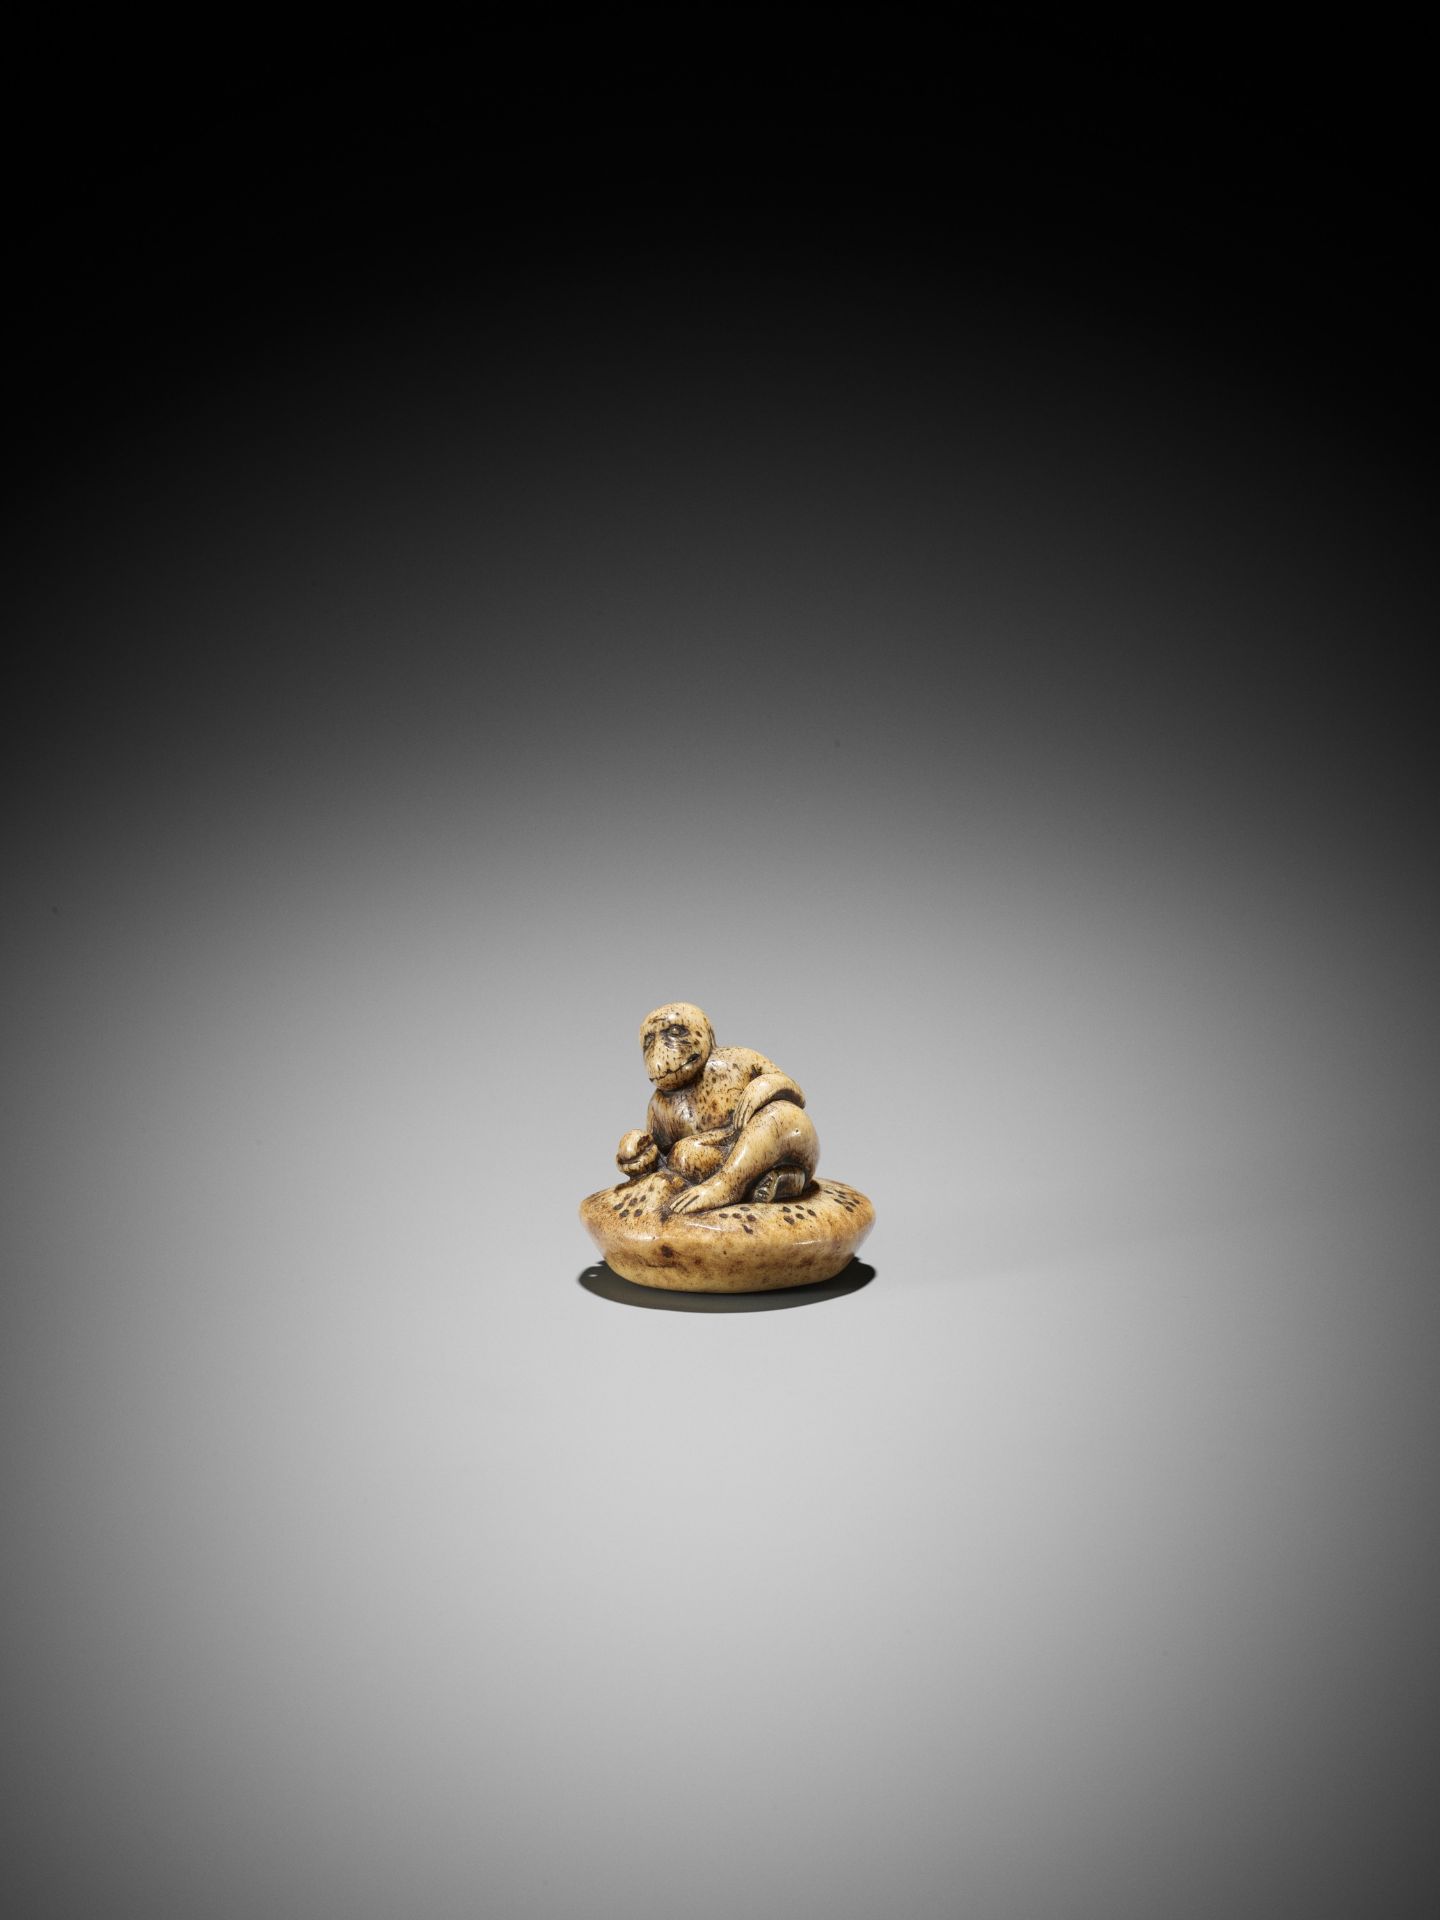 A STAG ANTLER NETSUKE OF A MONKEY HOLDING A PEACH - Image 7 of 8